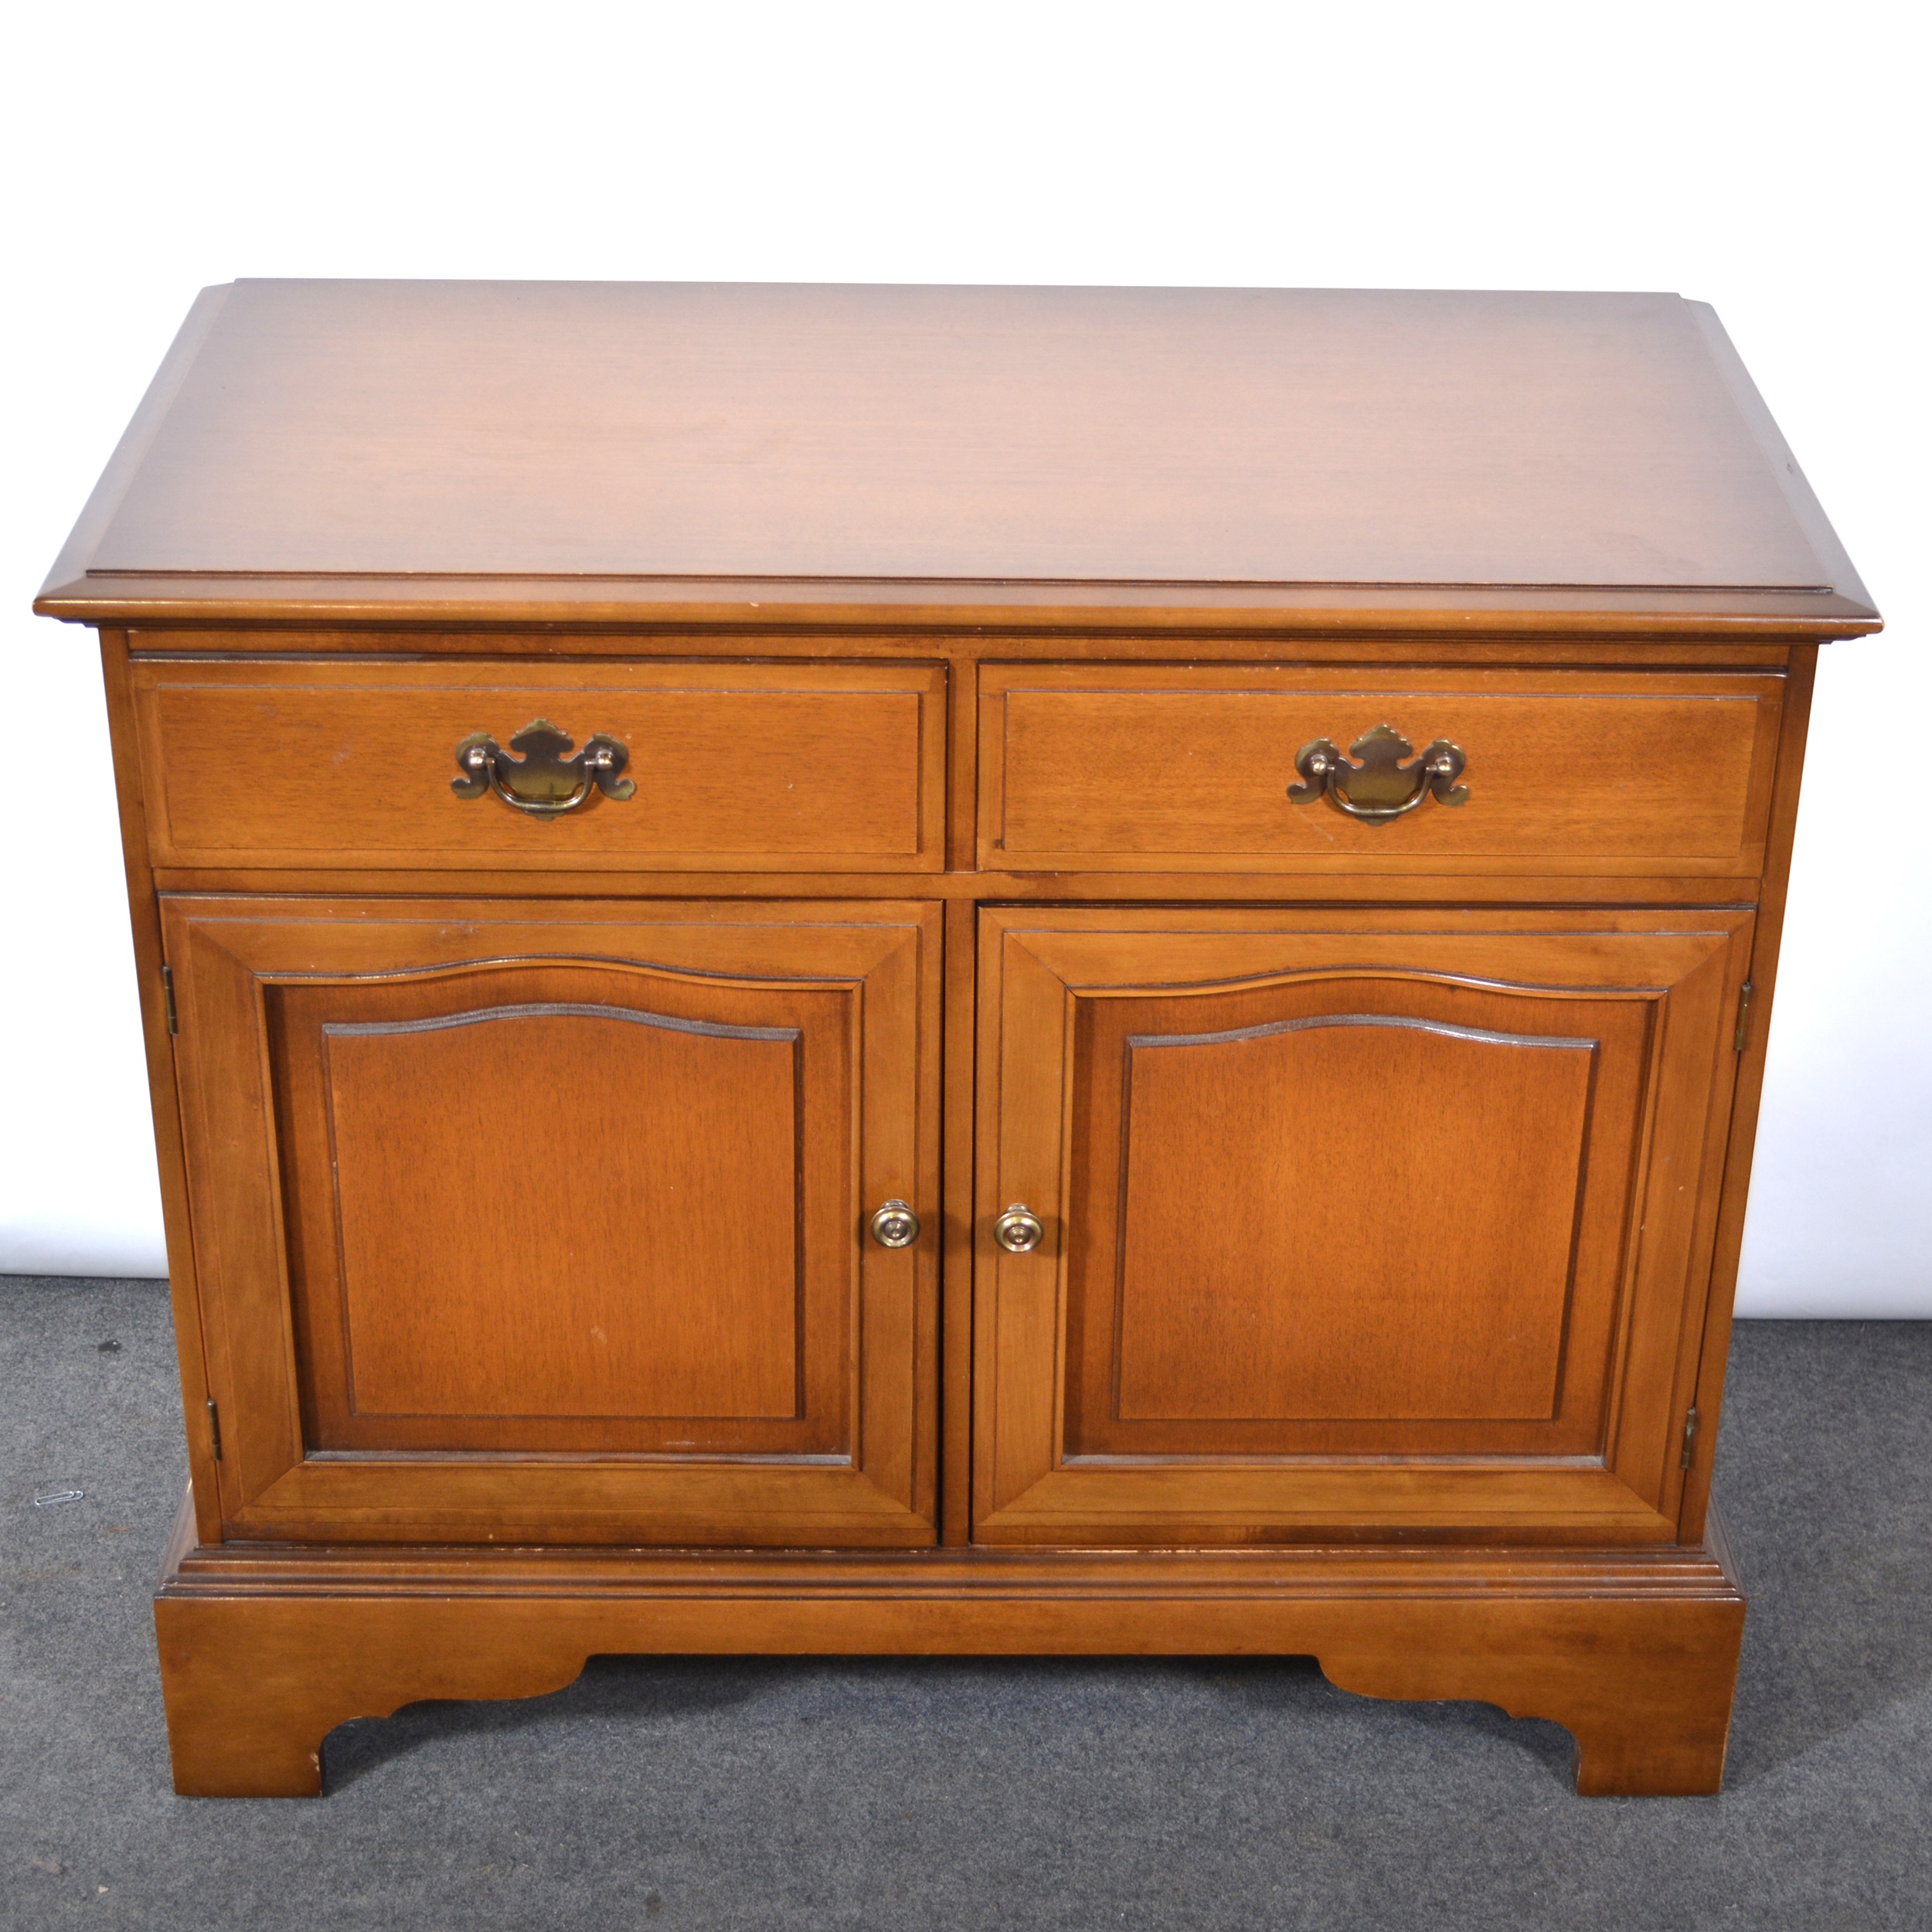 Reproduction walnut cupboard, - Image 2 of 2